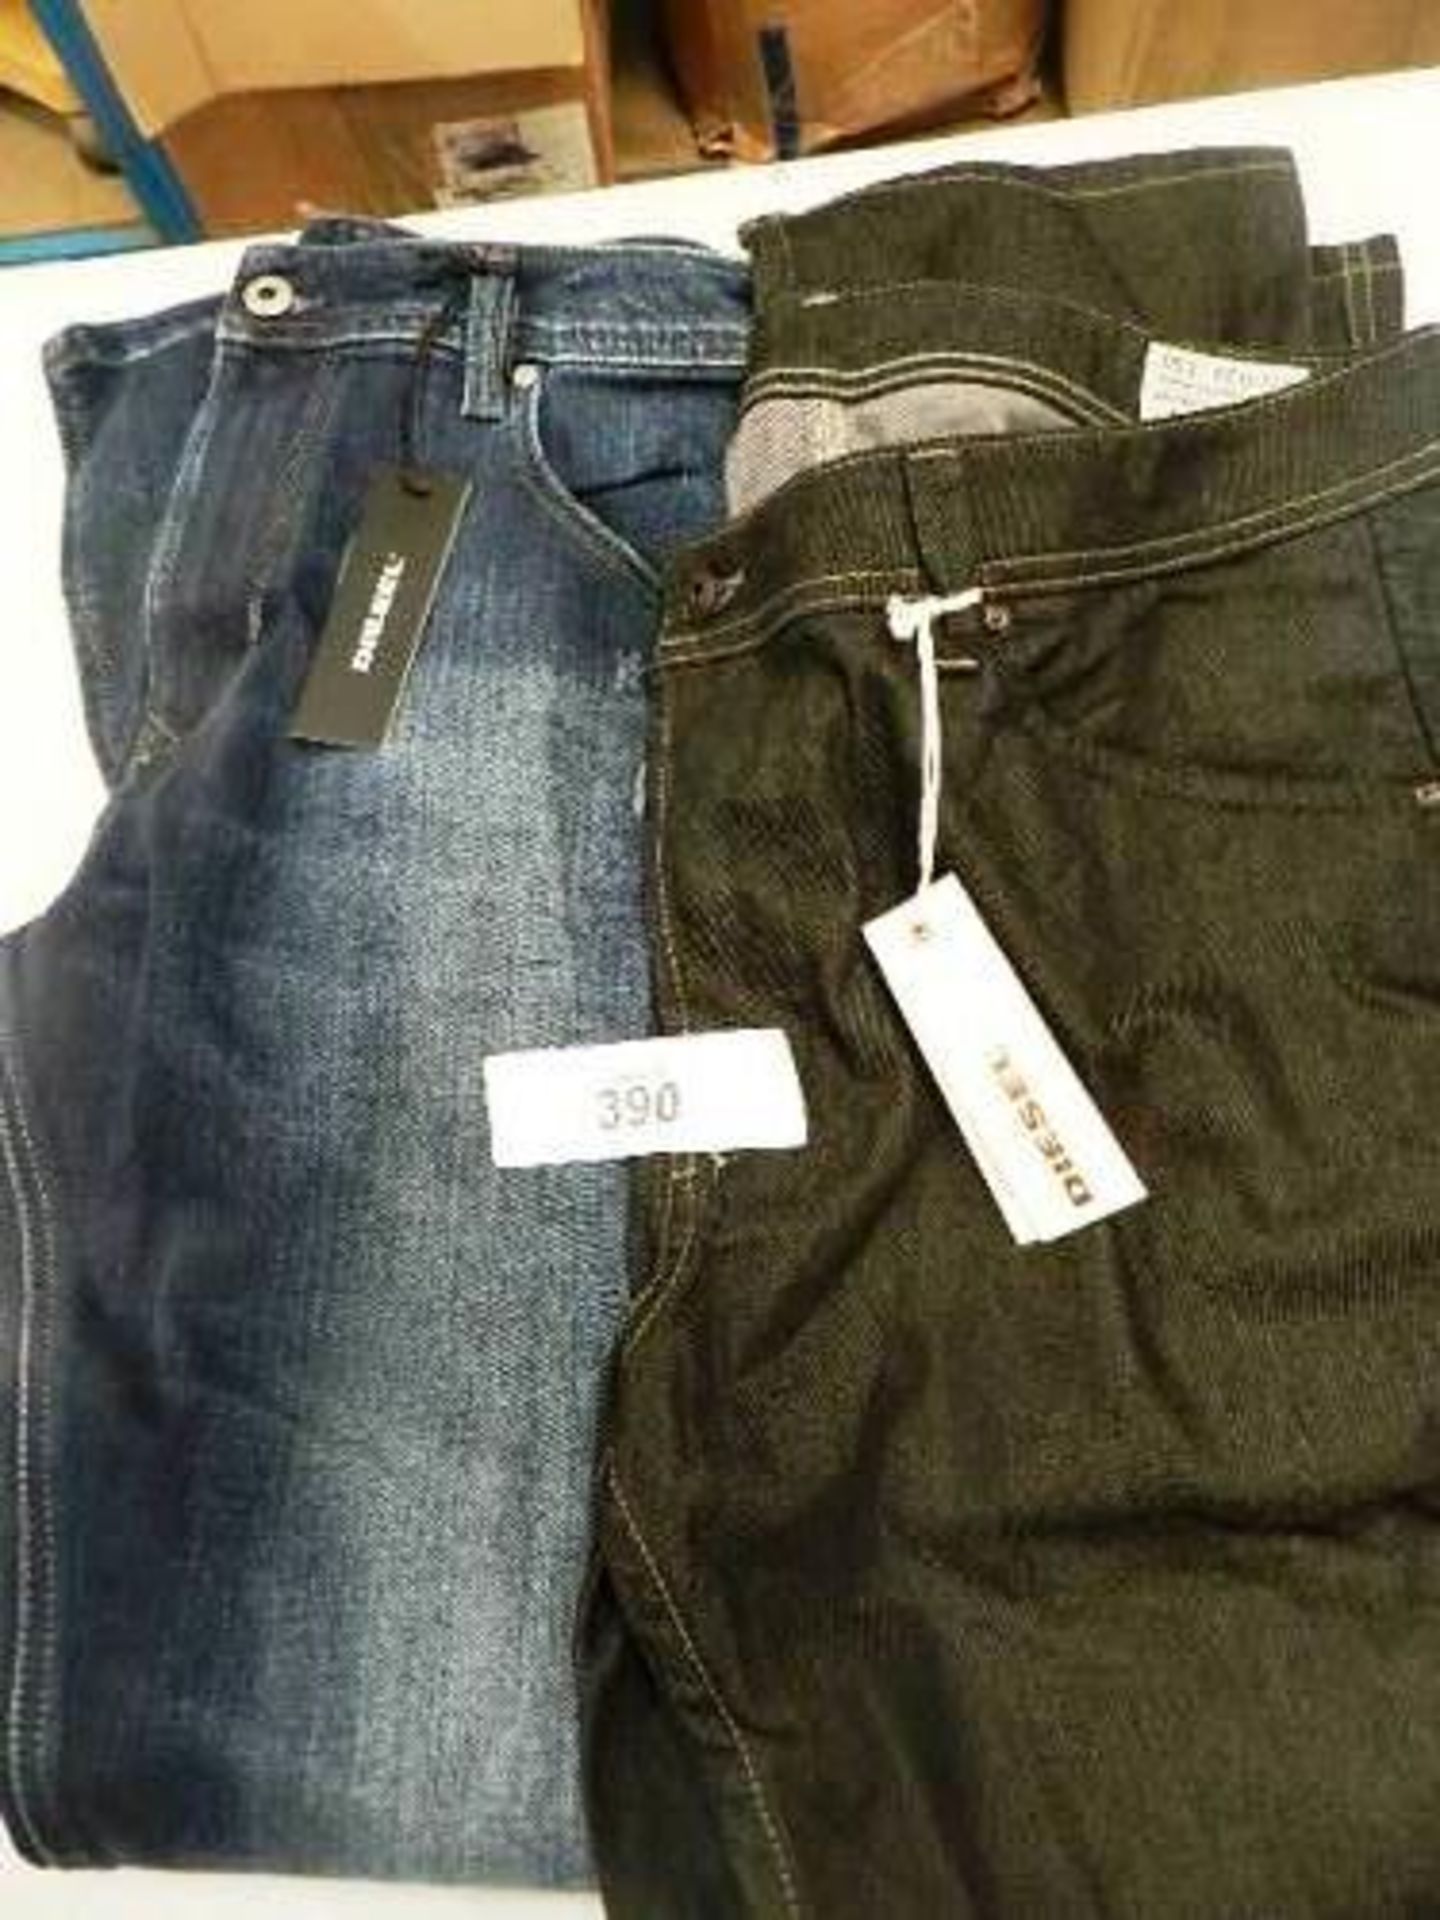 2 x pairs of Diesel jeans comprising 1 x Krayver size 29W/30L and 1 x Darron size 34W/30L - New (